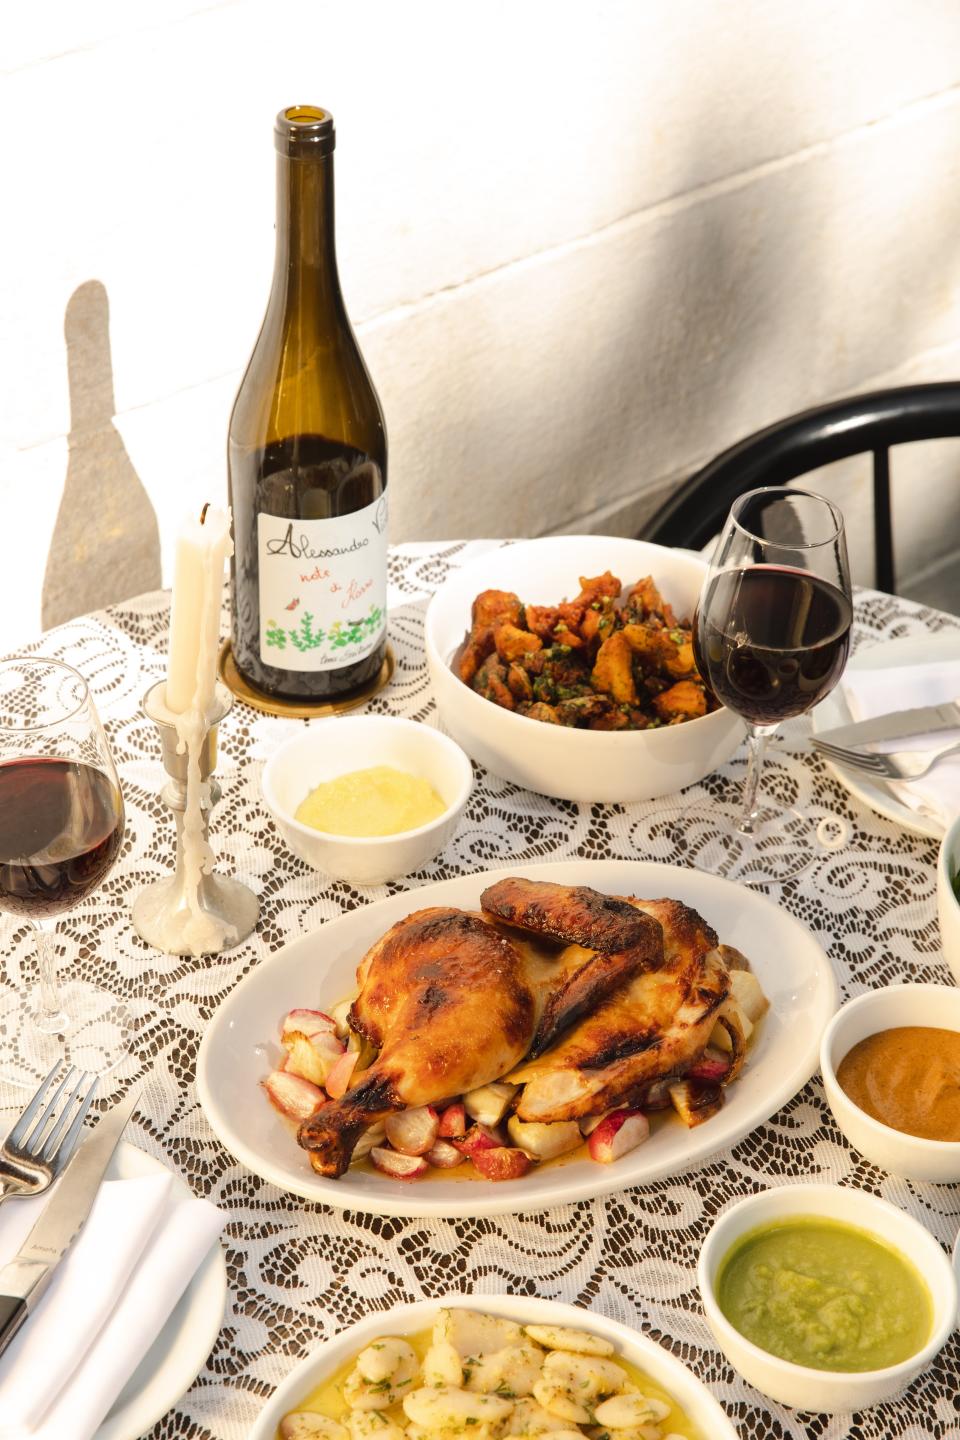 Rustic elegant Sunday Supper served at Lou includes natural red wine, roast chicken and accoutrements.